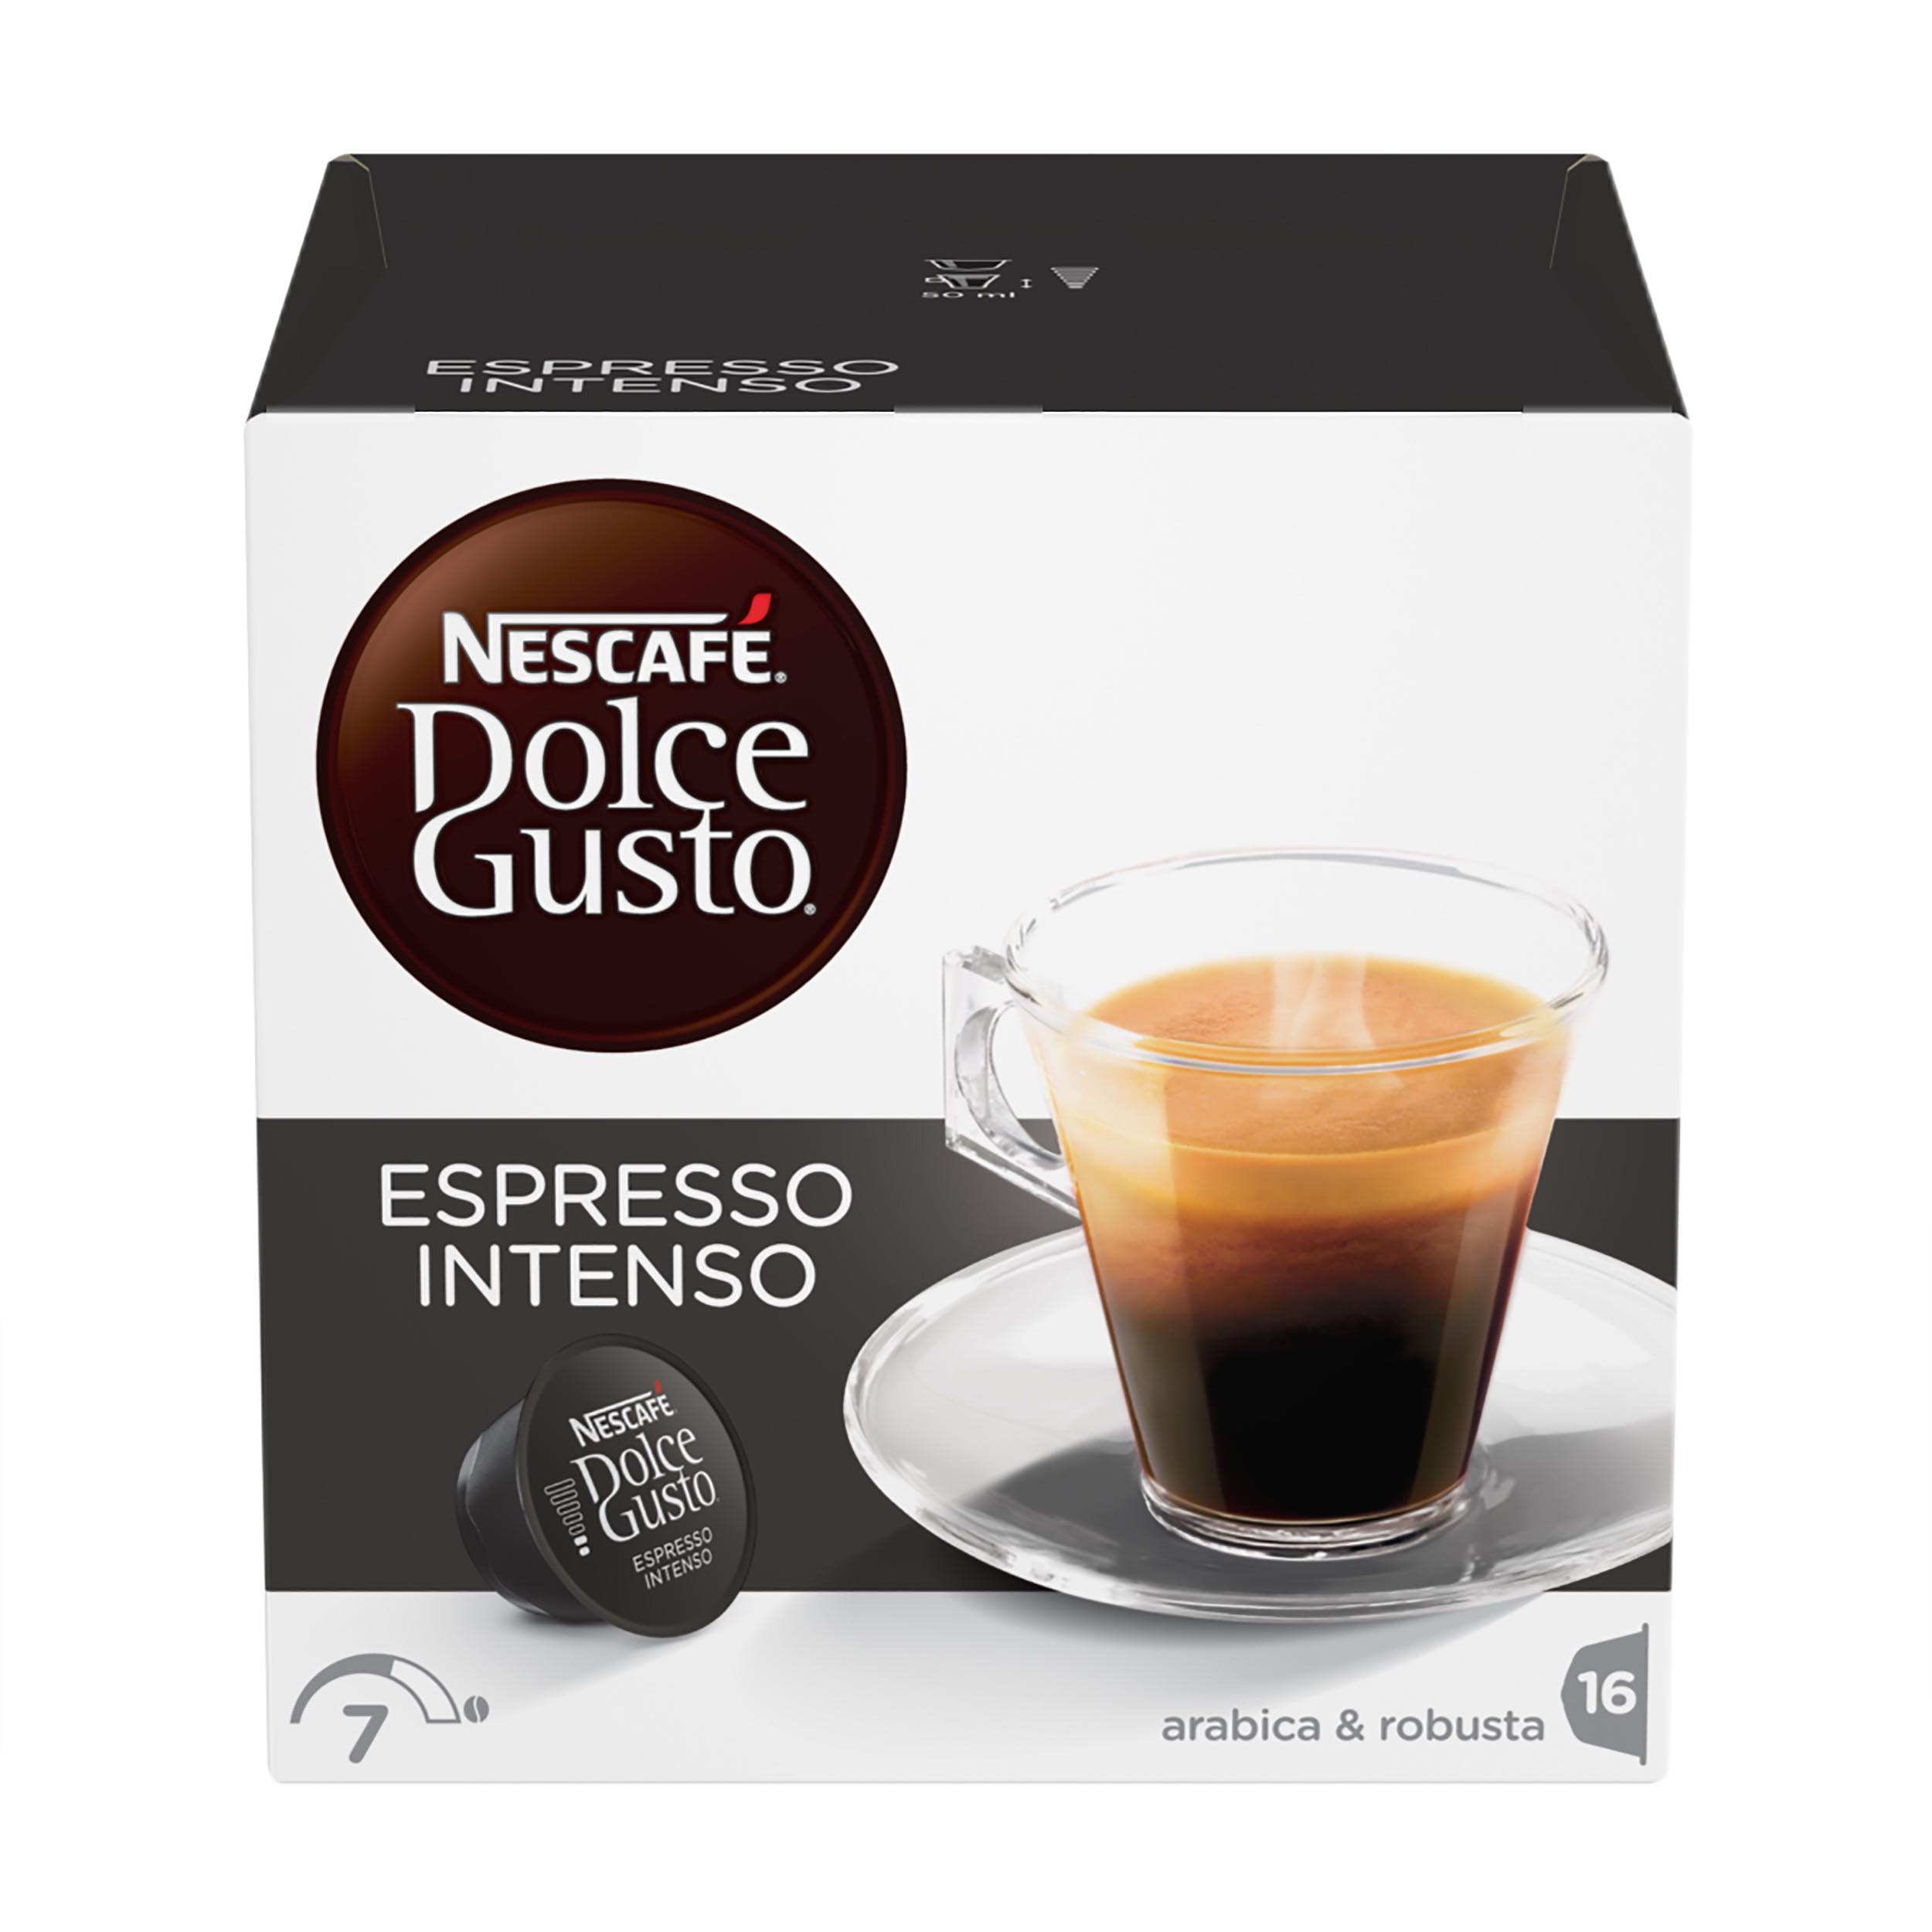 Какие капсулы dolce gusto. Espresso intenso капсулы Dolce gusto. Dolce gusto капсулы Espresso. Nescafe Dolce gusto капсулы. Офе в капсулах Nescafe Dolce gusto Espress.